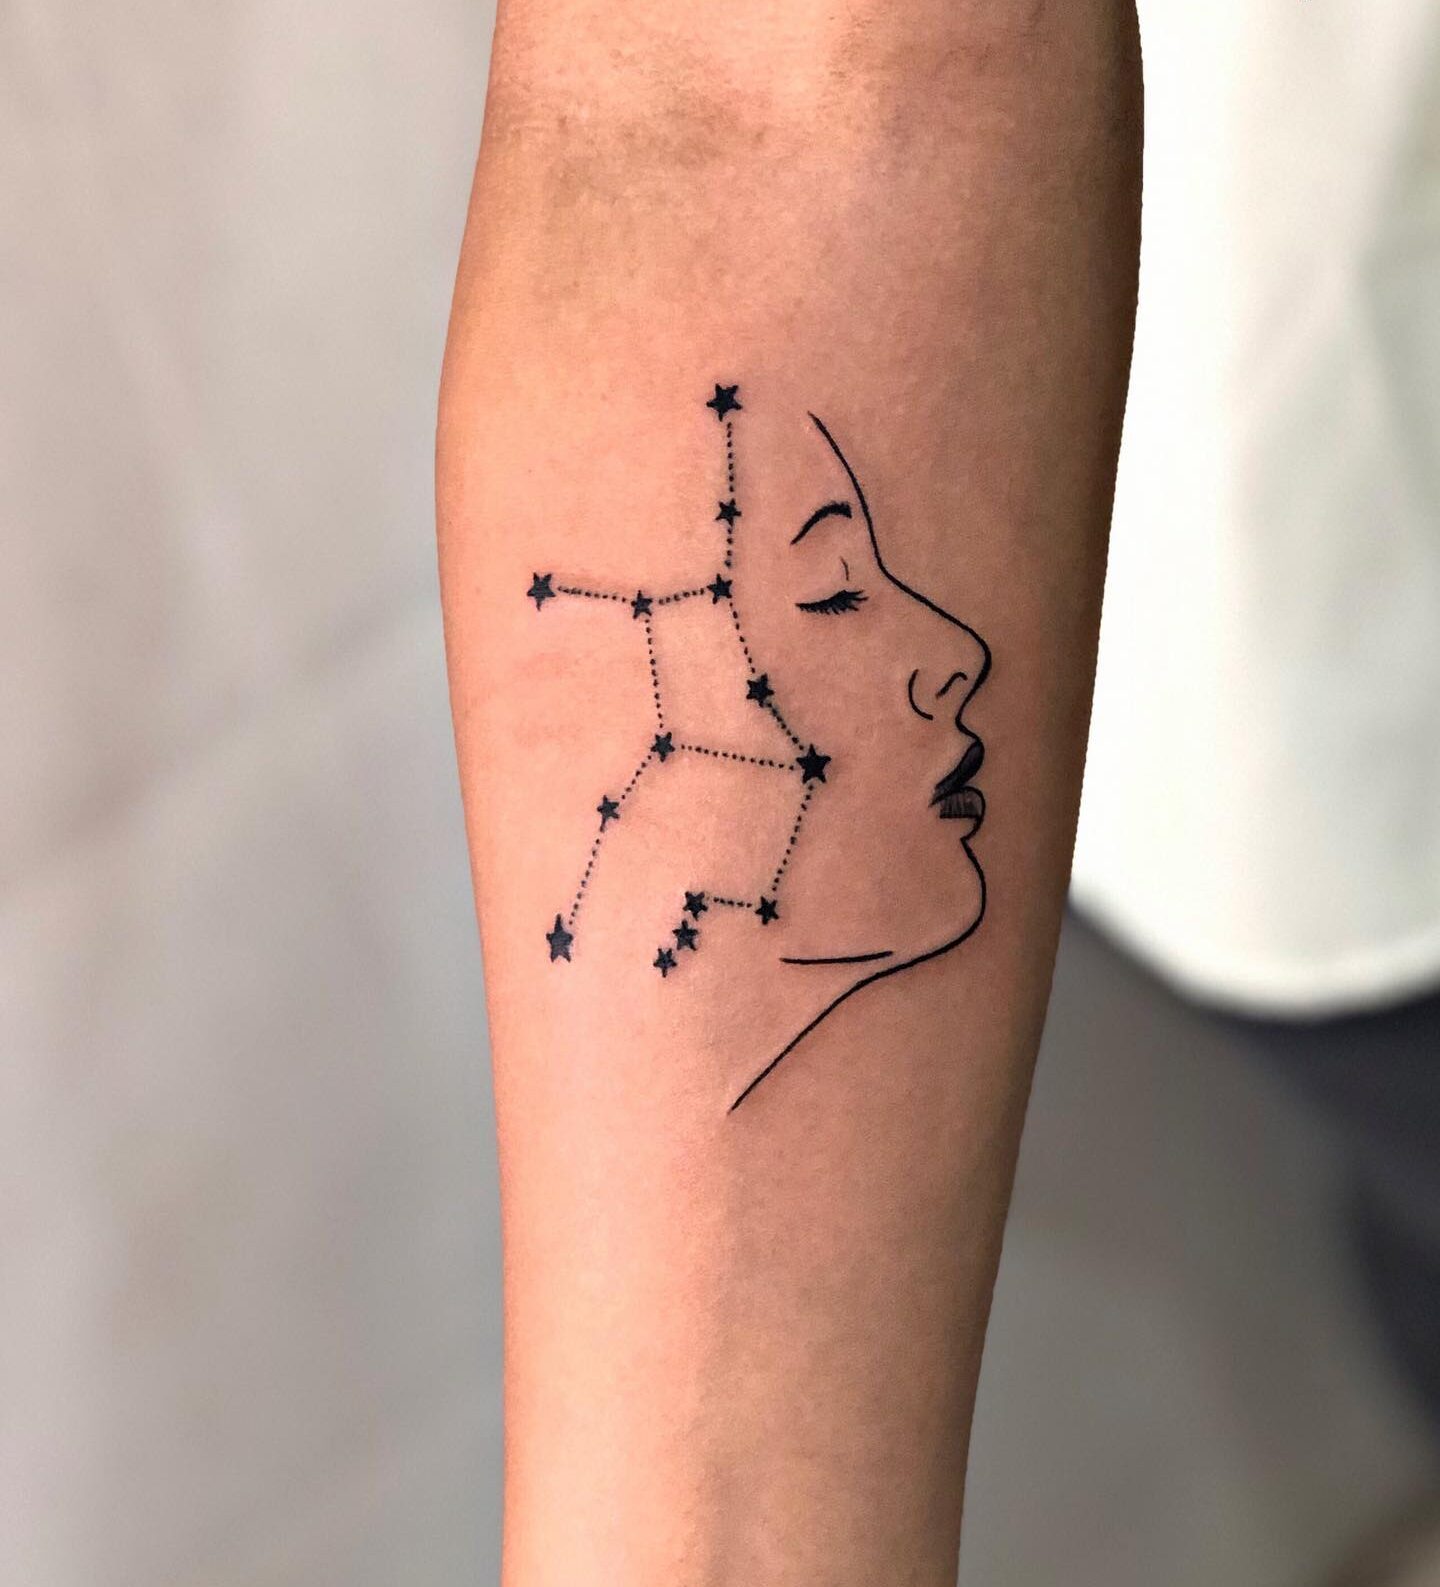 Virgo constellation and face tattoo on the inner forearm